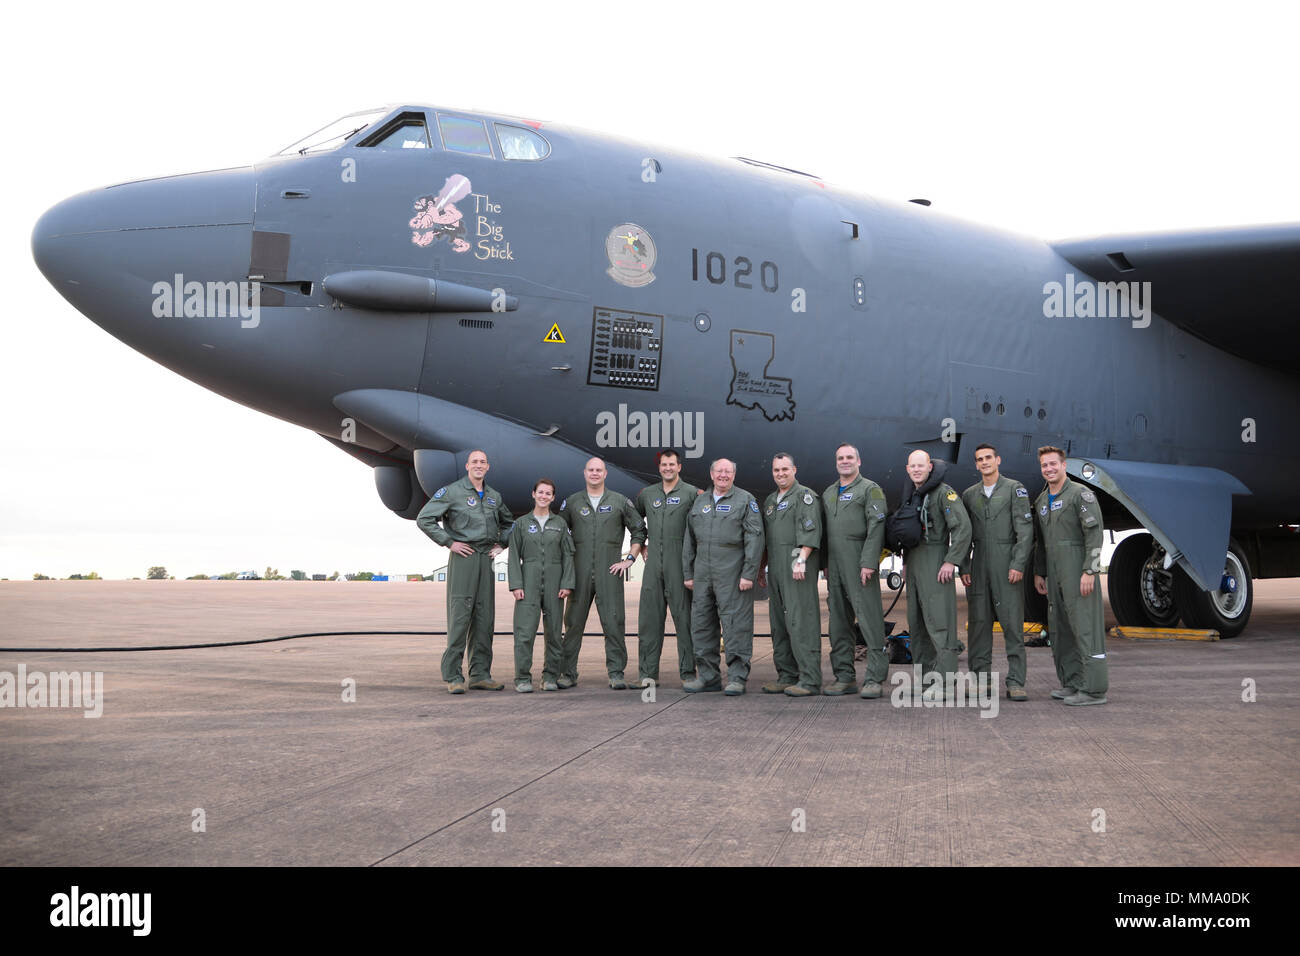 A B-52 Stratofortress aircrew poses for a photo after landing at Fairford Royal Air Force Base, Sept. 22, 2017. The aircrew participated in SERPENTEX 17, a coalition exercise that brought teams together from the U.S., U.K., France and Canada. (U.S. Air Force photo/Staff Sgt. Benjamin Raughton) Stock Photo